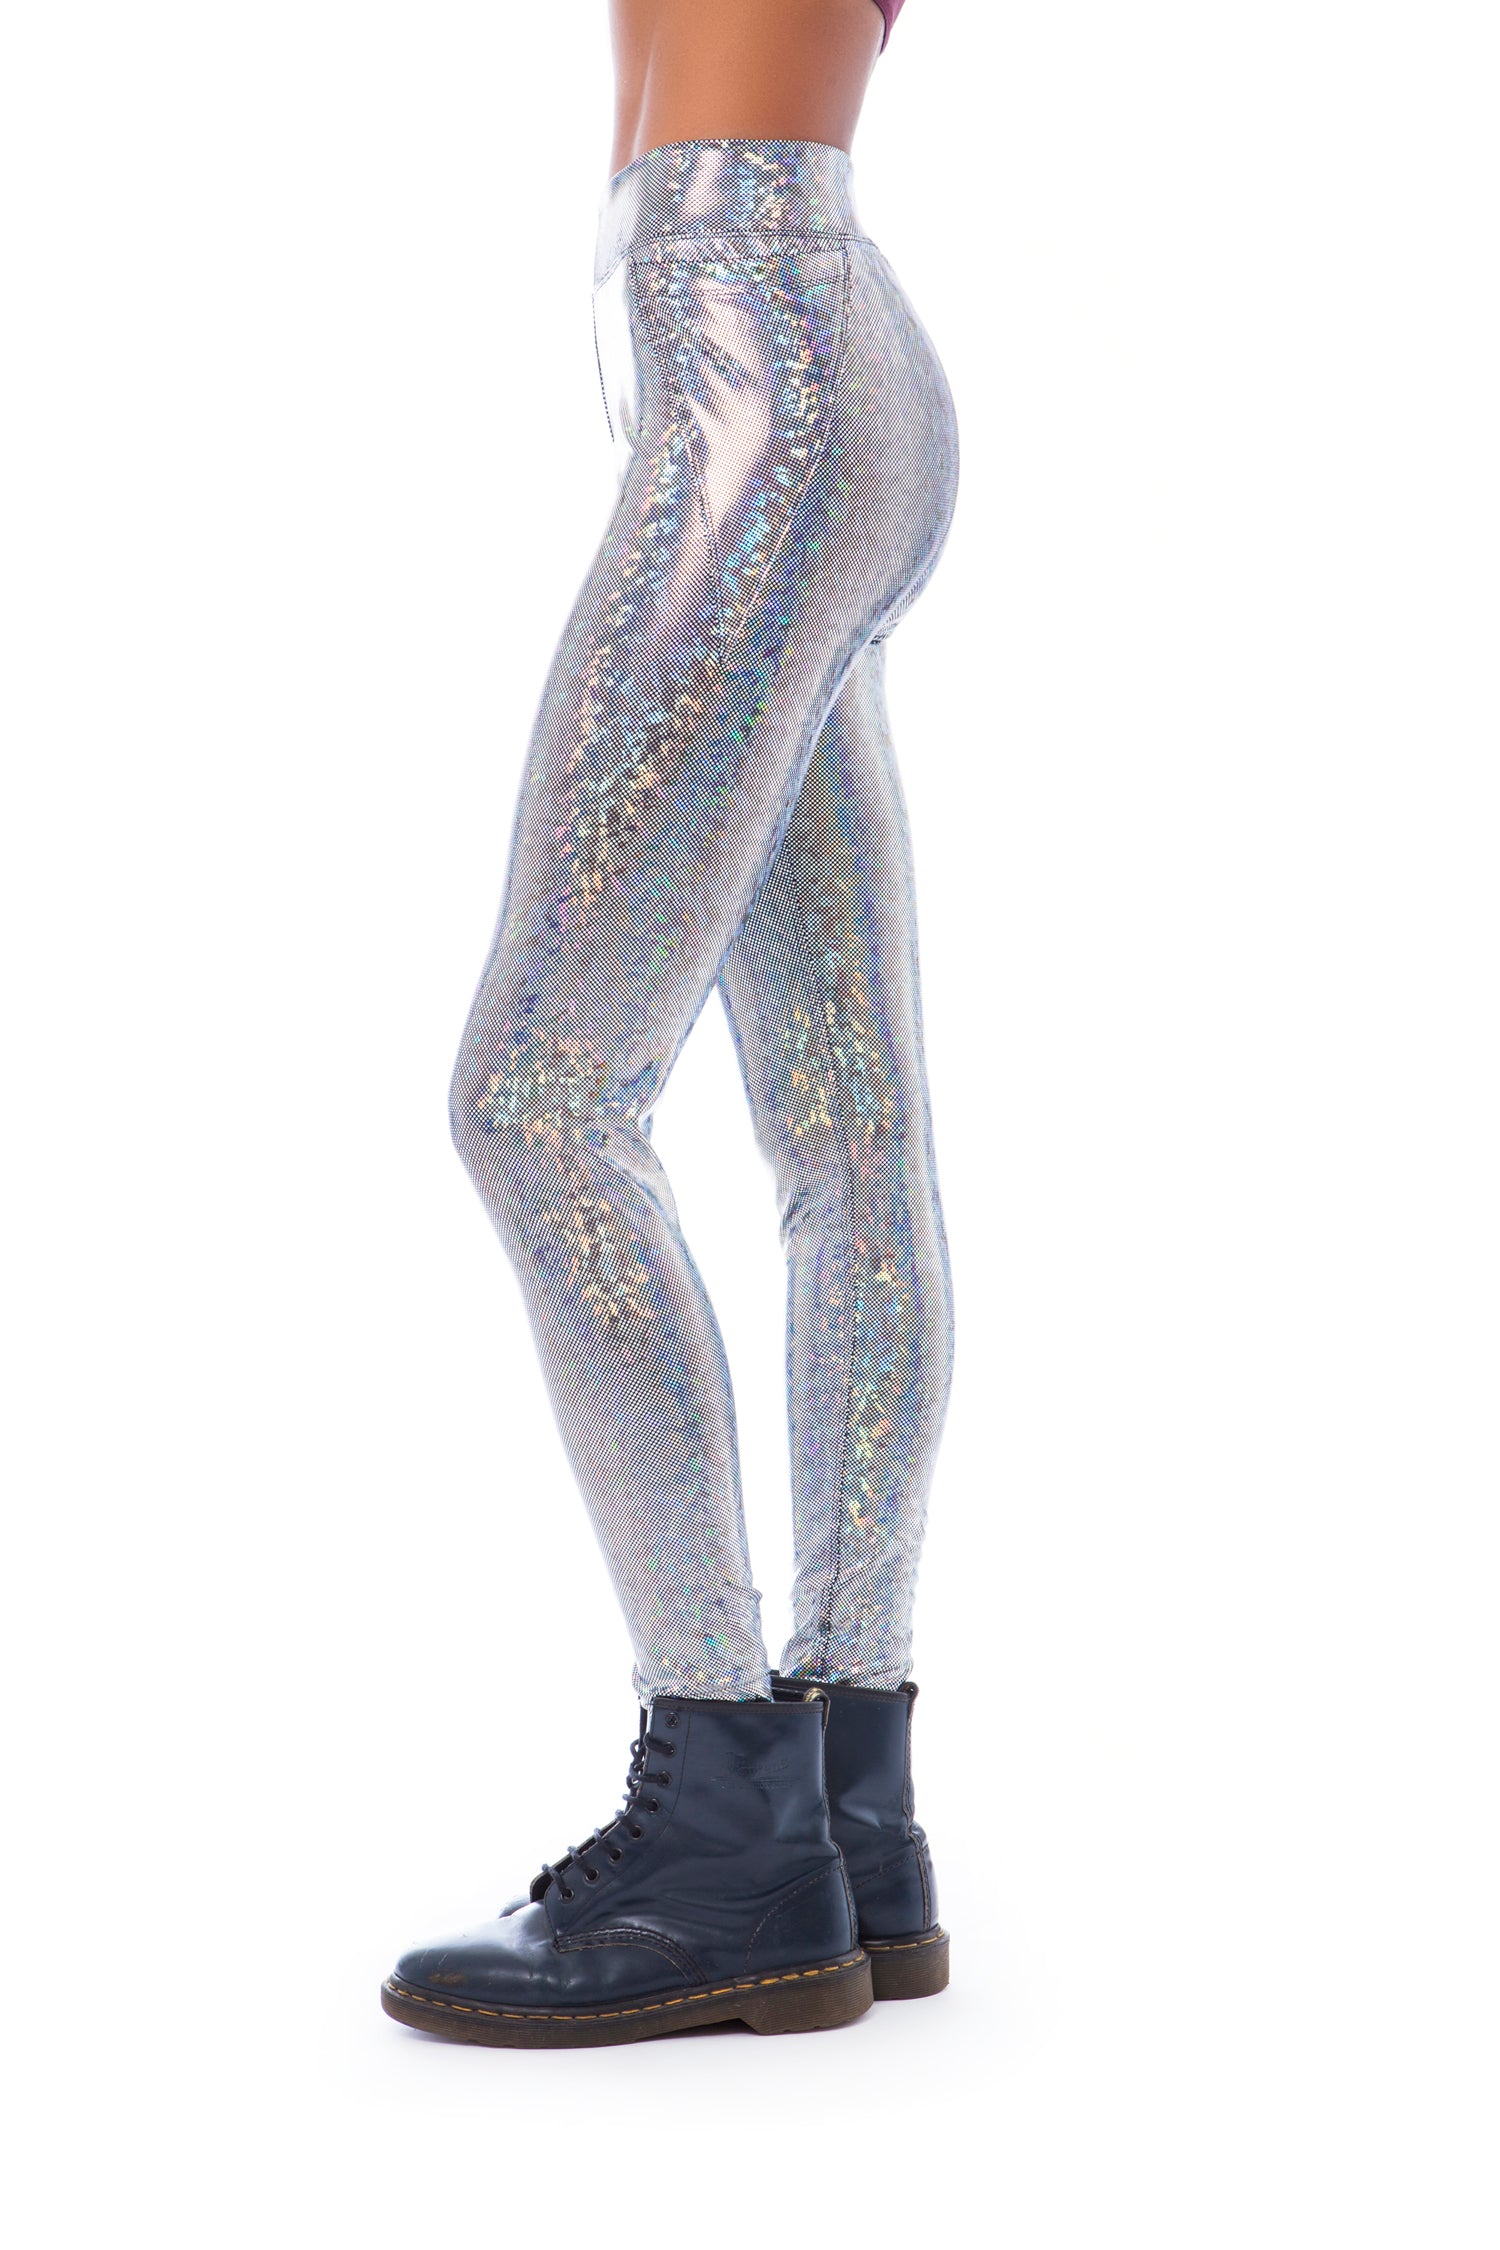 Silver on Black Holographic Small Scale Mermaid Leggings, Pocket Leggings,  Leggings With Pockets 